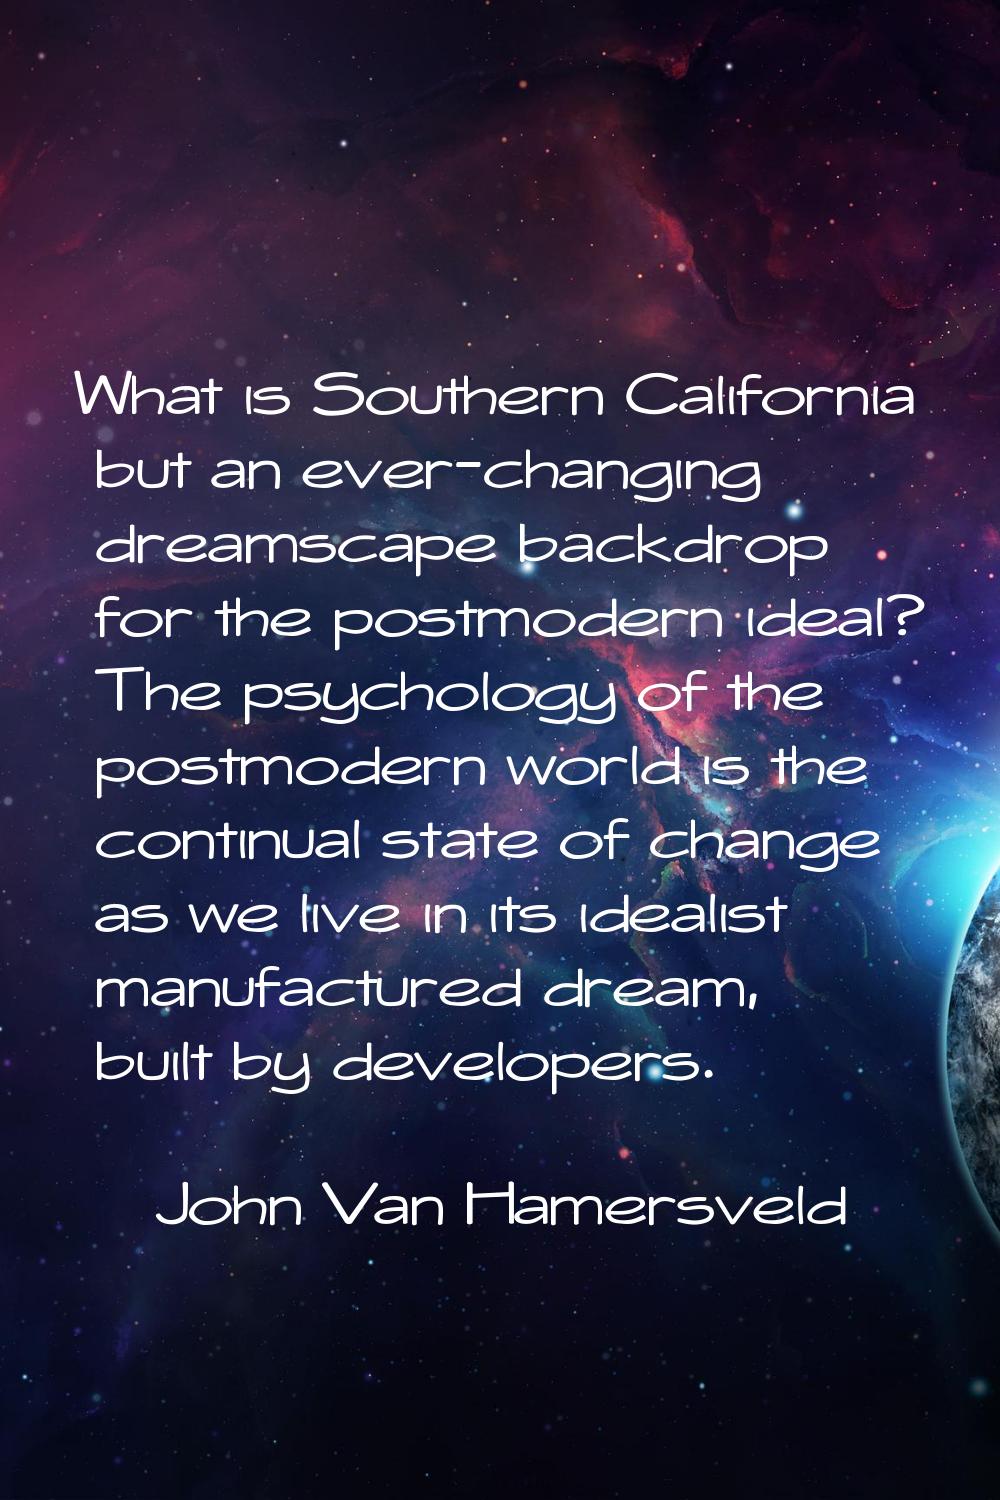 What is Southern California but an ever-changing dreamscape backdrop for the postmodern ideal? The 